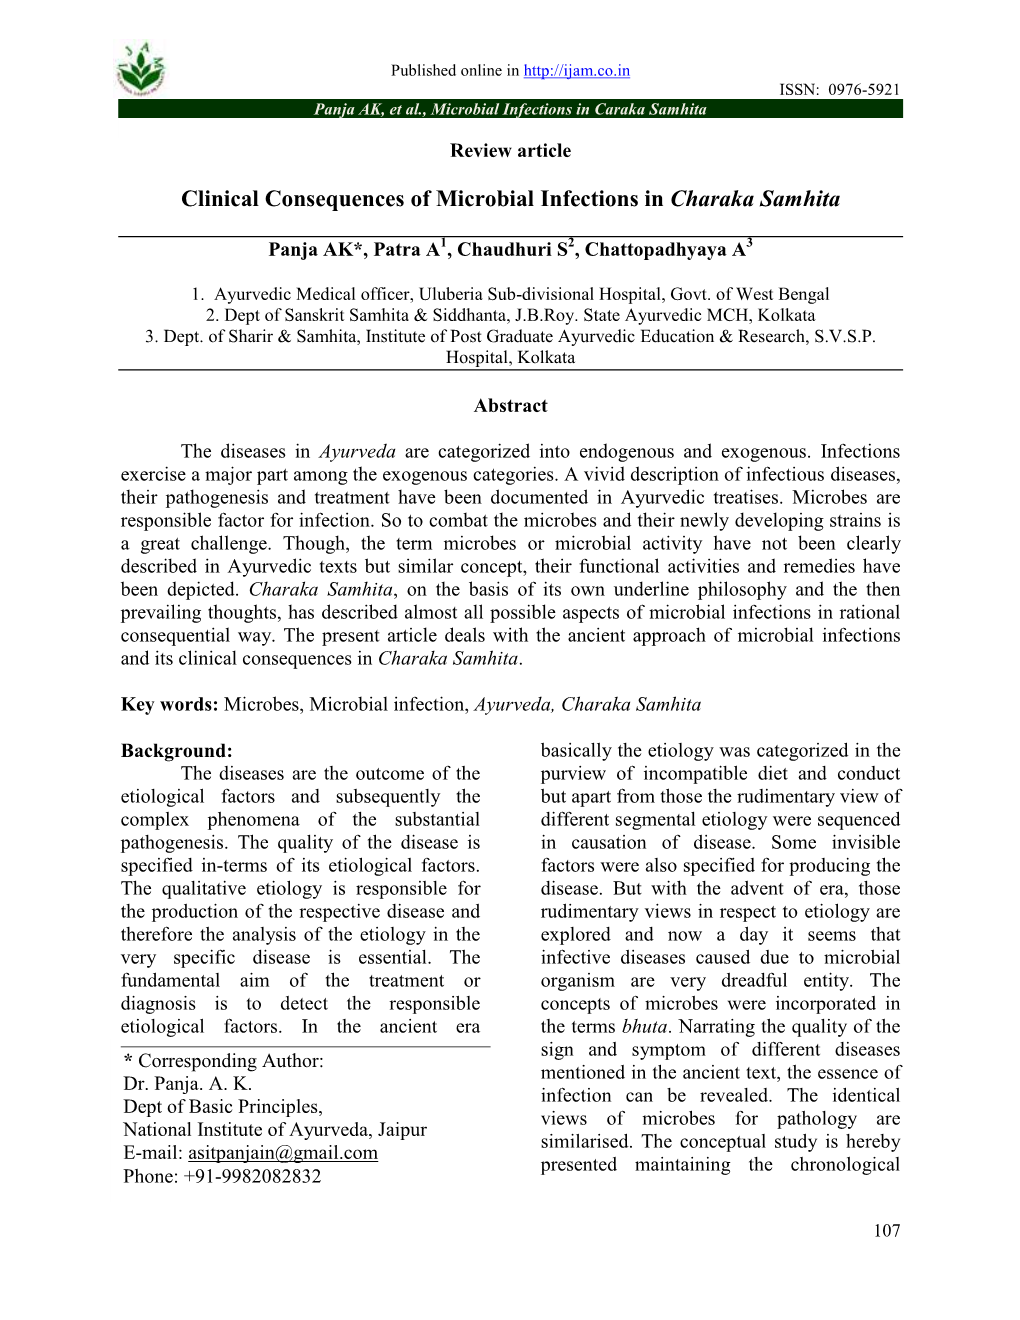 Clinical Consequences of Microbial Infections in Charaka Samhita